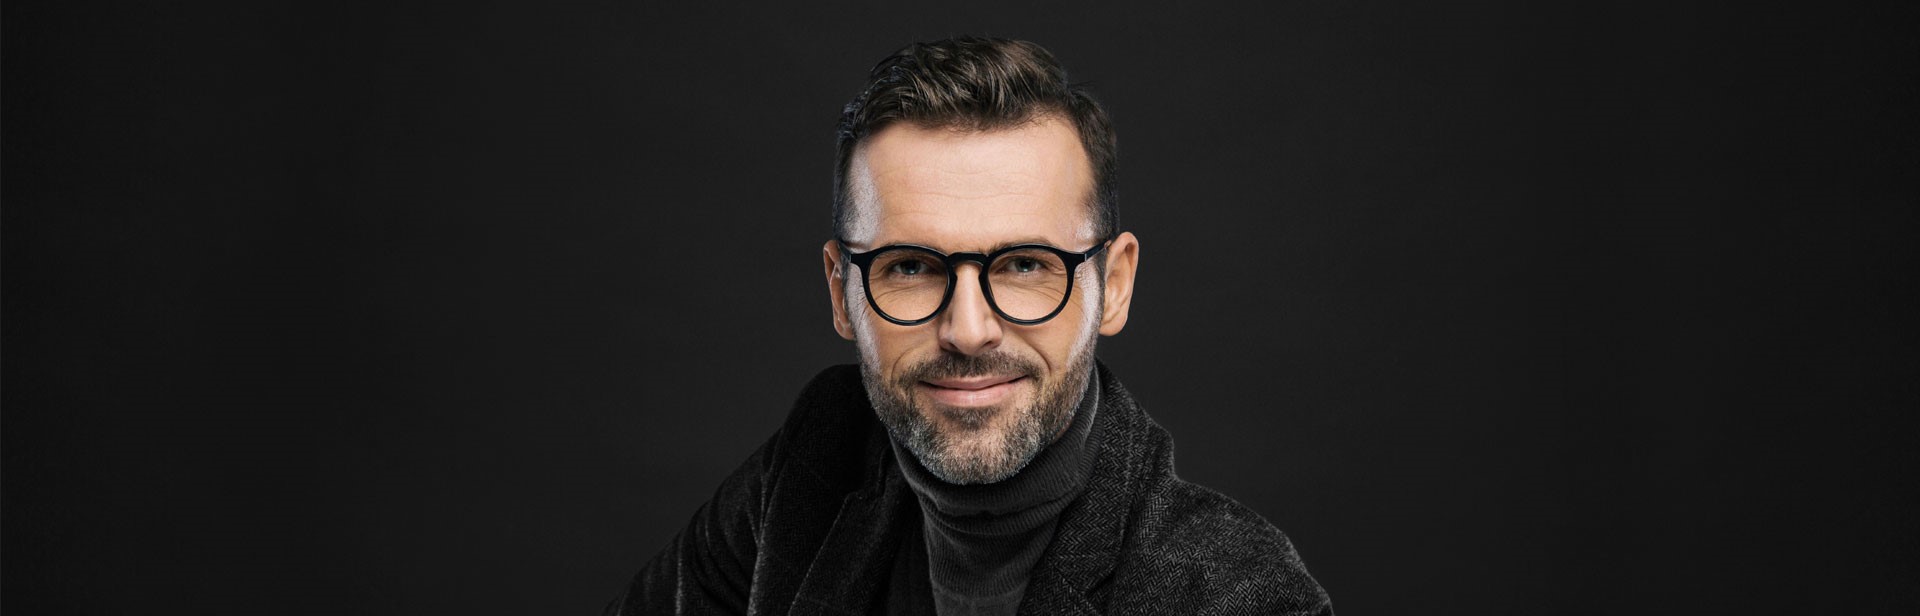 Man with glasses on bold dark background